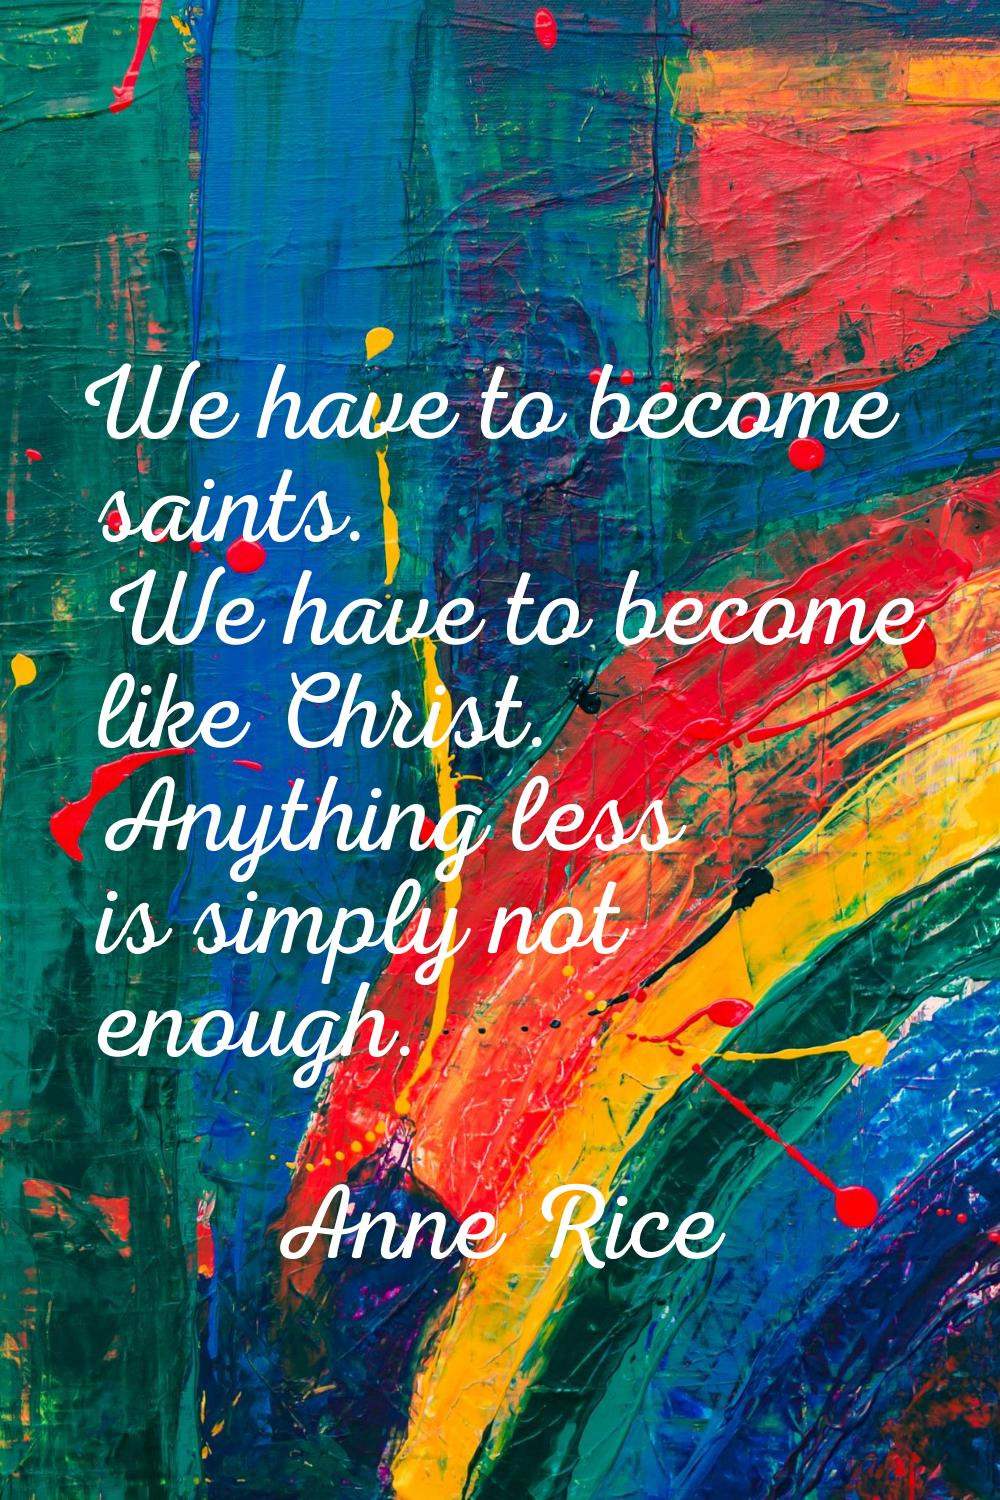 We have to become saints. We have to become like Christ. Anything less is simply not enough.